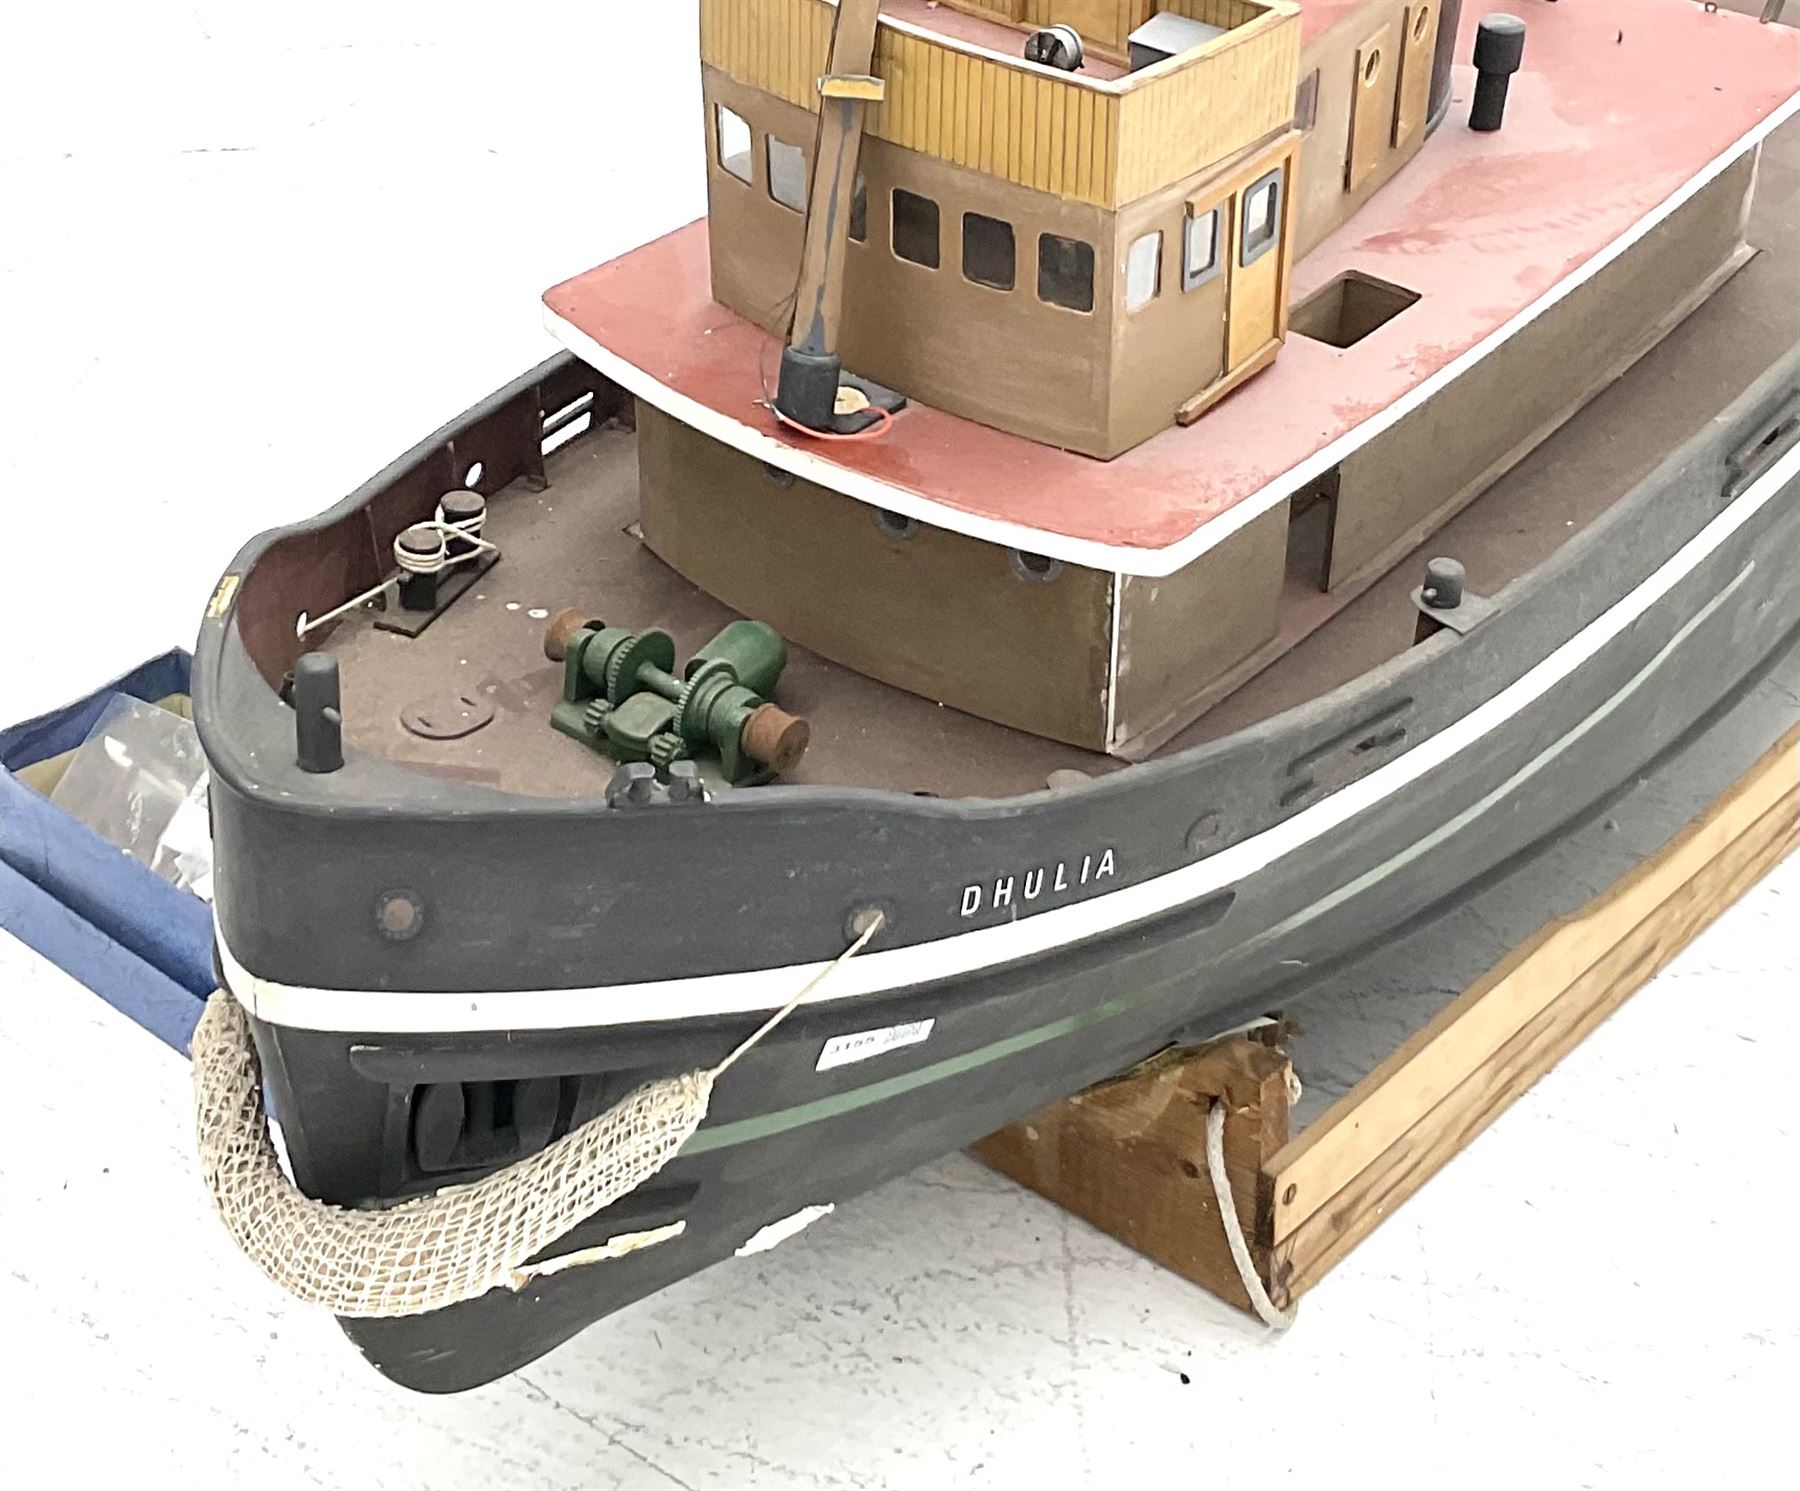 Large model of the tugboat 'Dhulia' on a wooden stand L144cm - Image 8 of 14